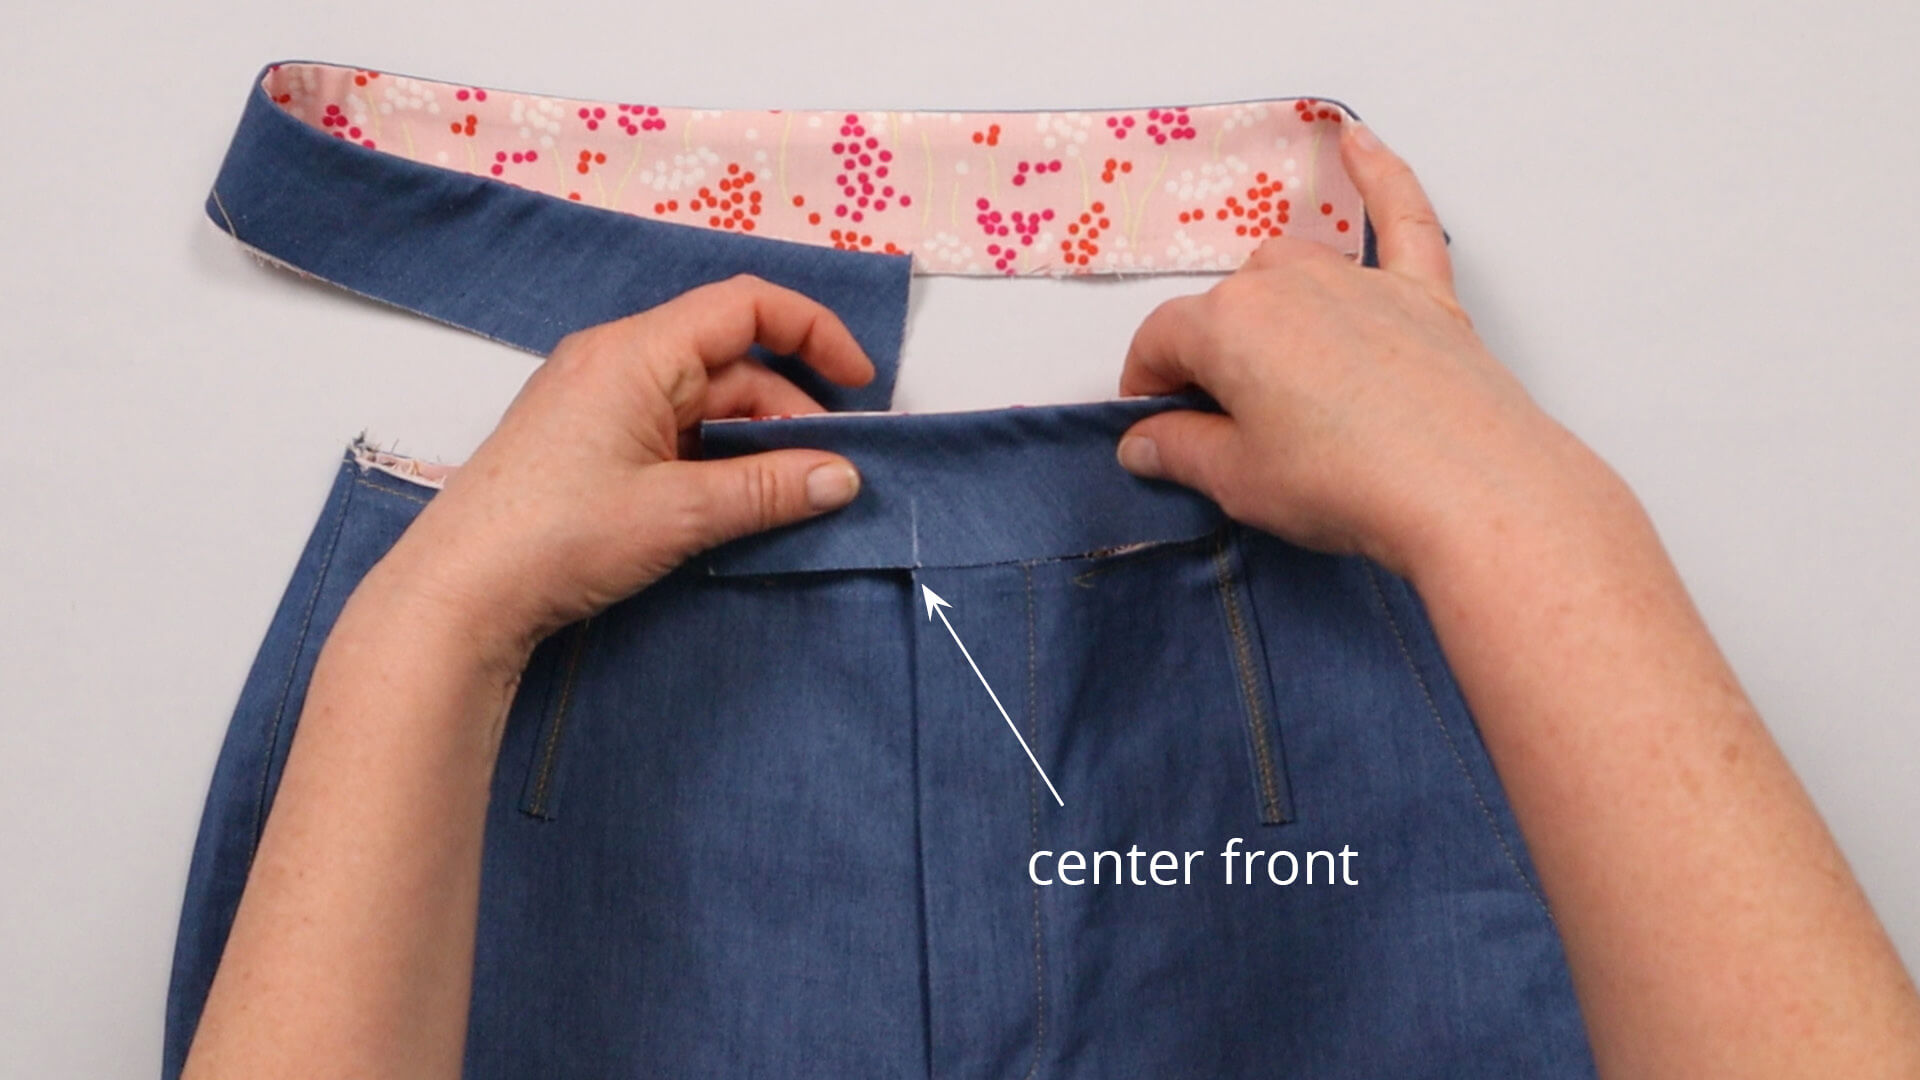 The picture shows how the left side of the waistband is placed at the center front.